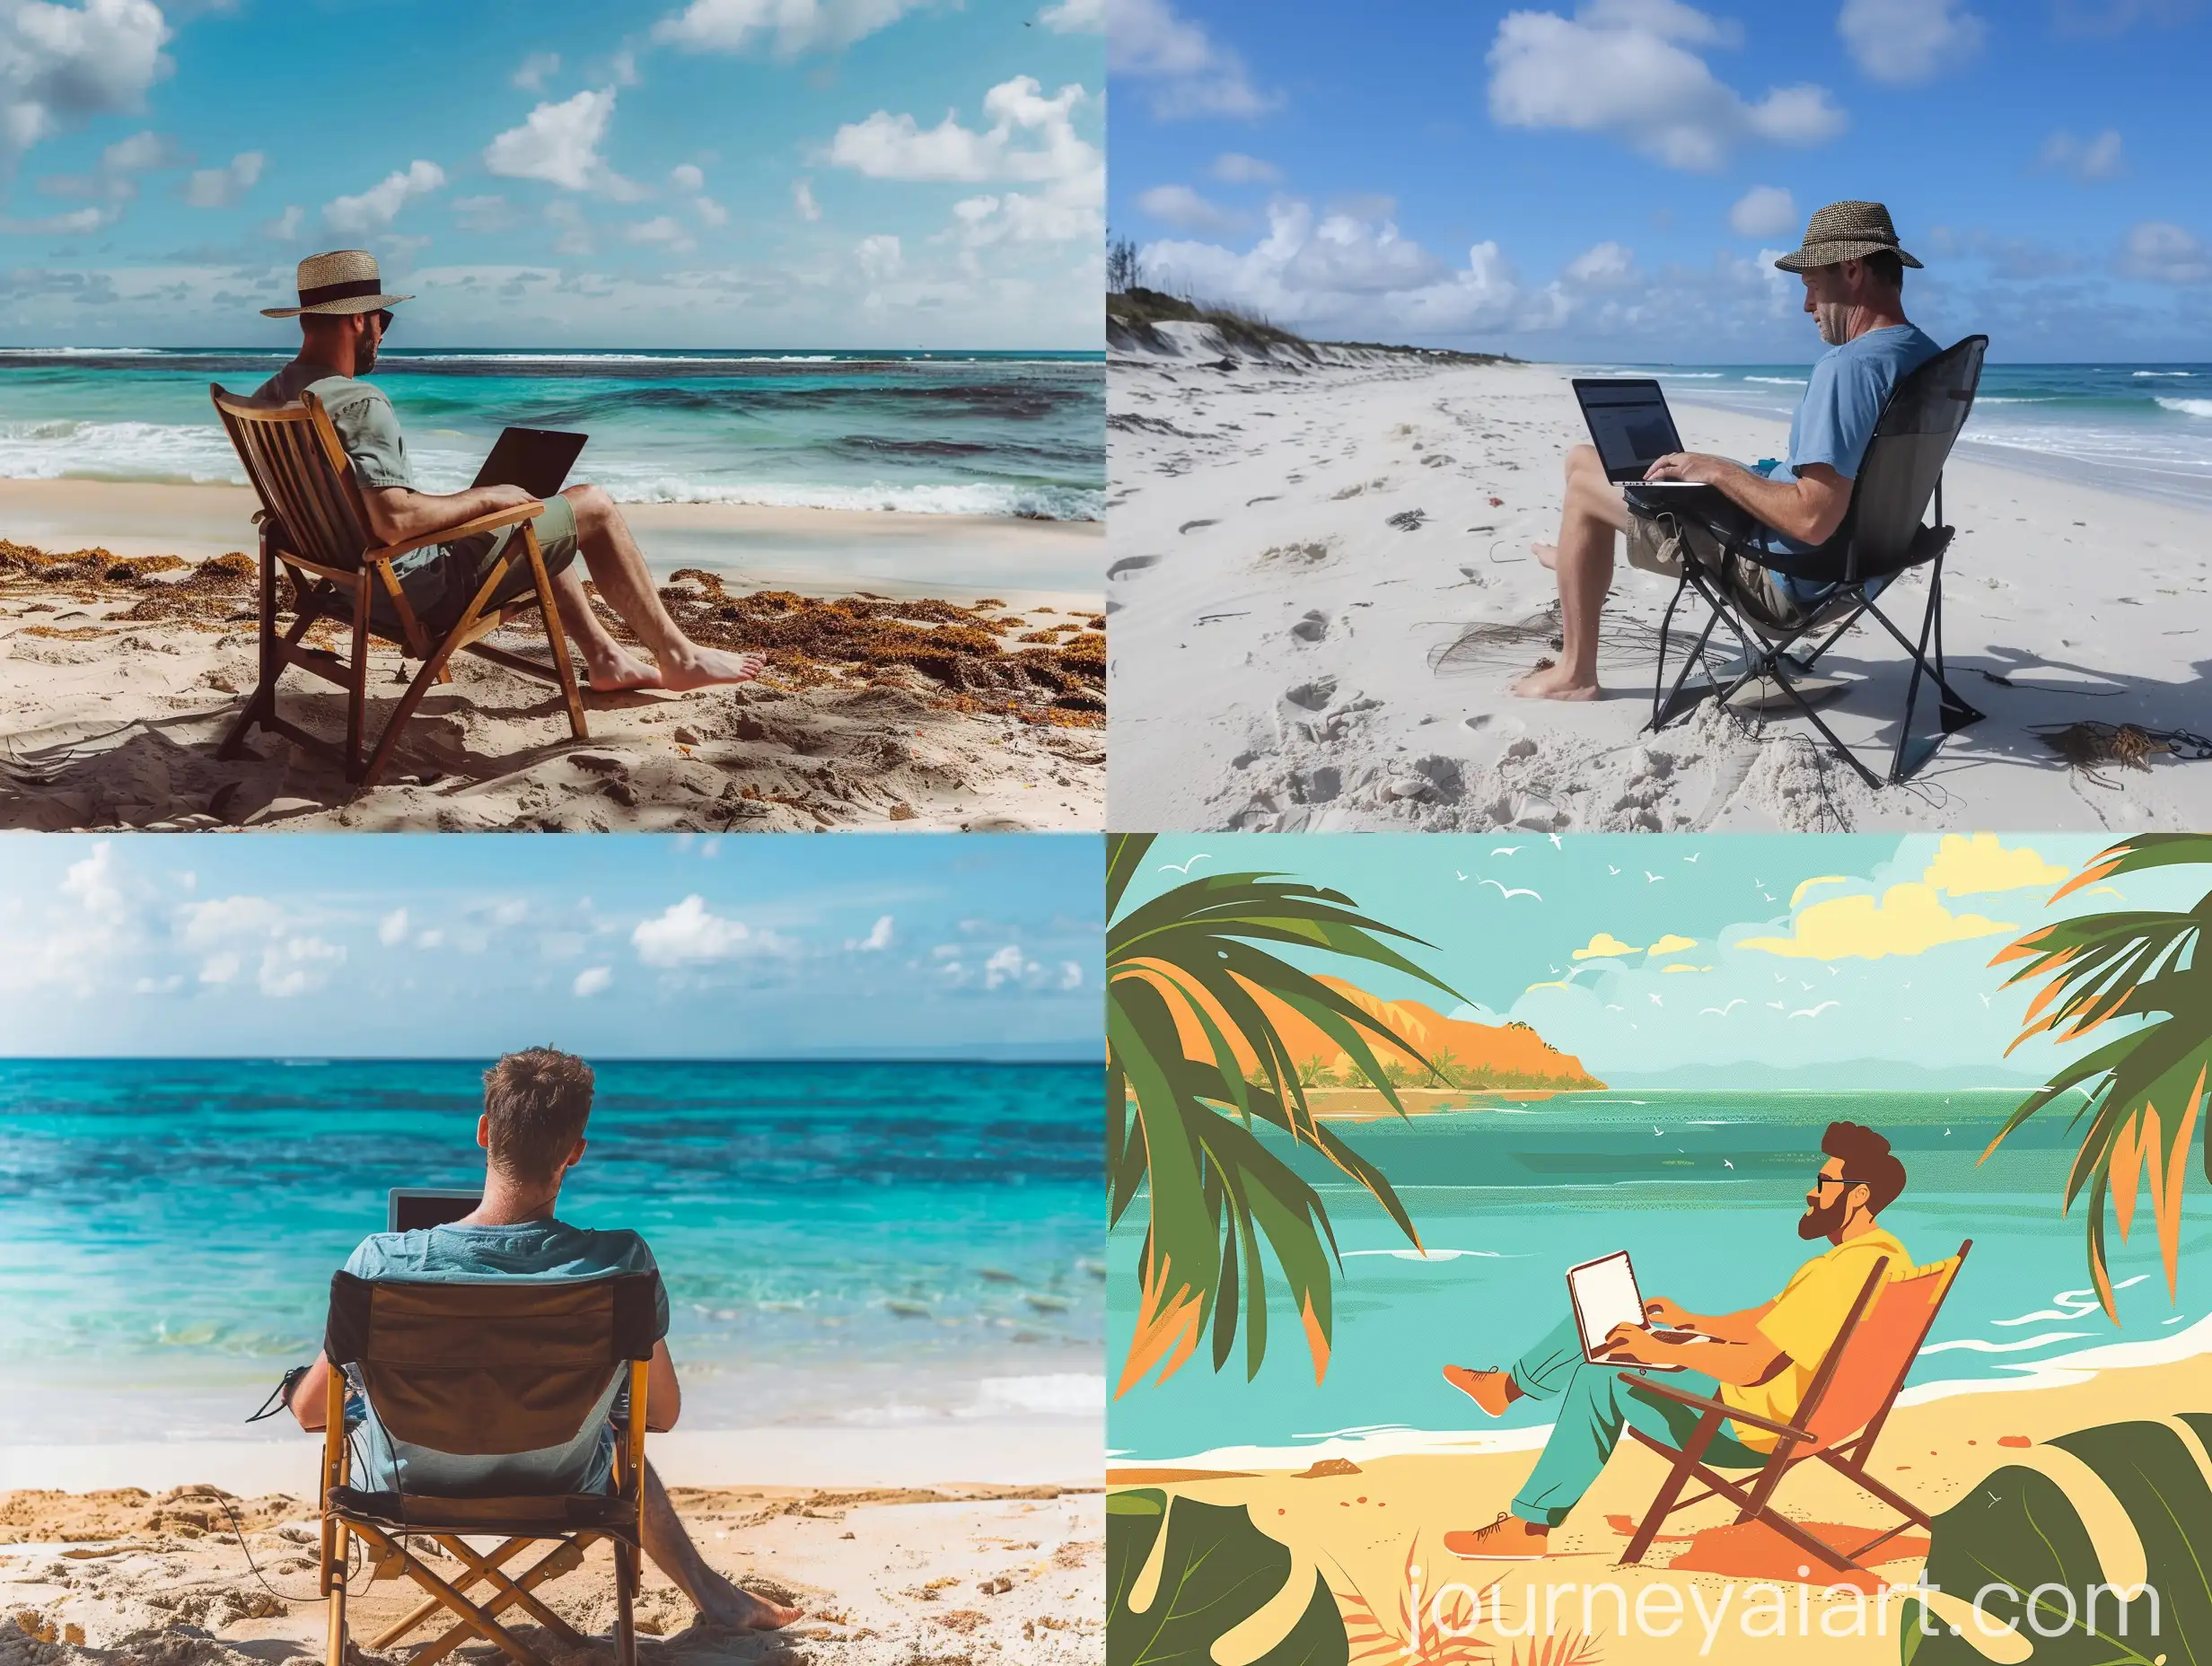 Nomad-Lifestyle-Man-Relaxing-on-Beach-with-Laptop-Making-Money